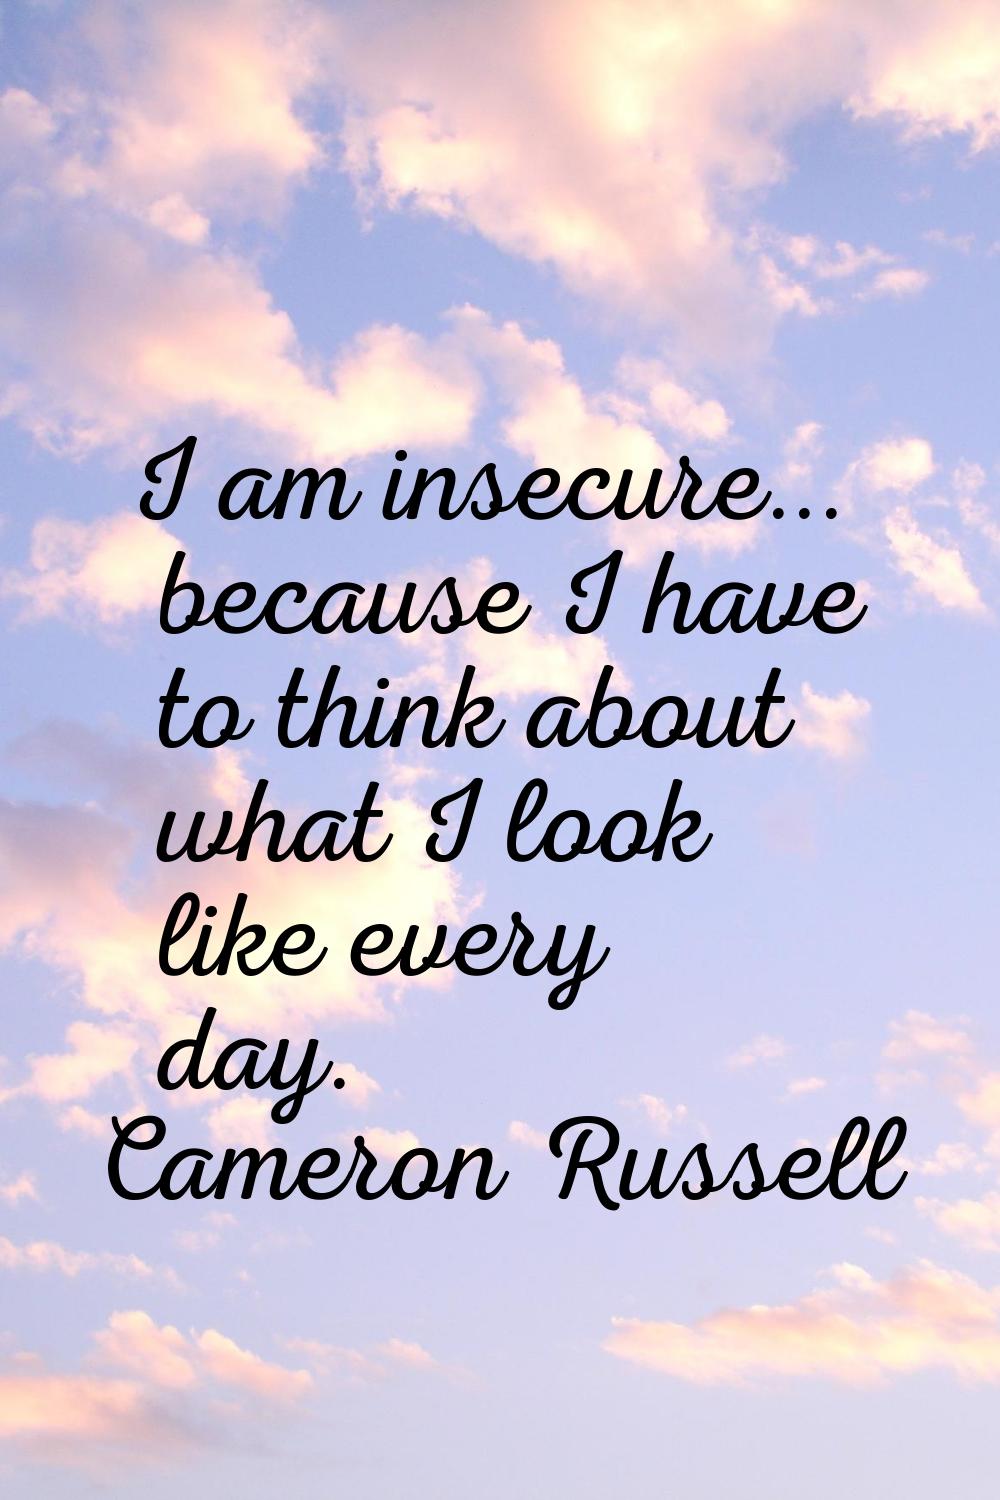 I am insecure... because I have to think about what I look like every day.